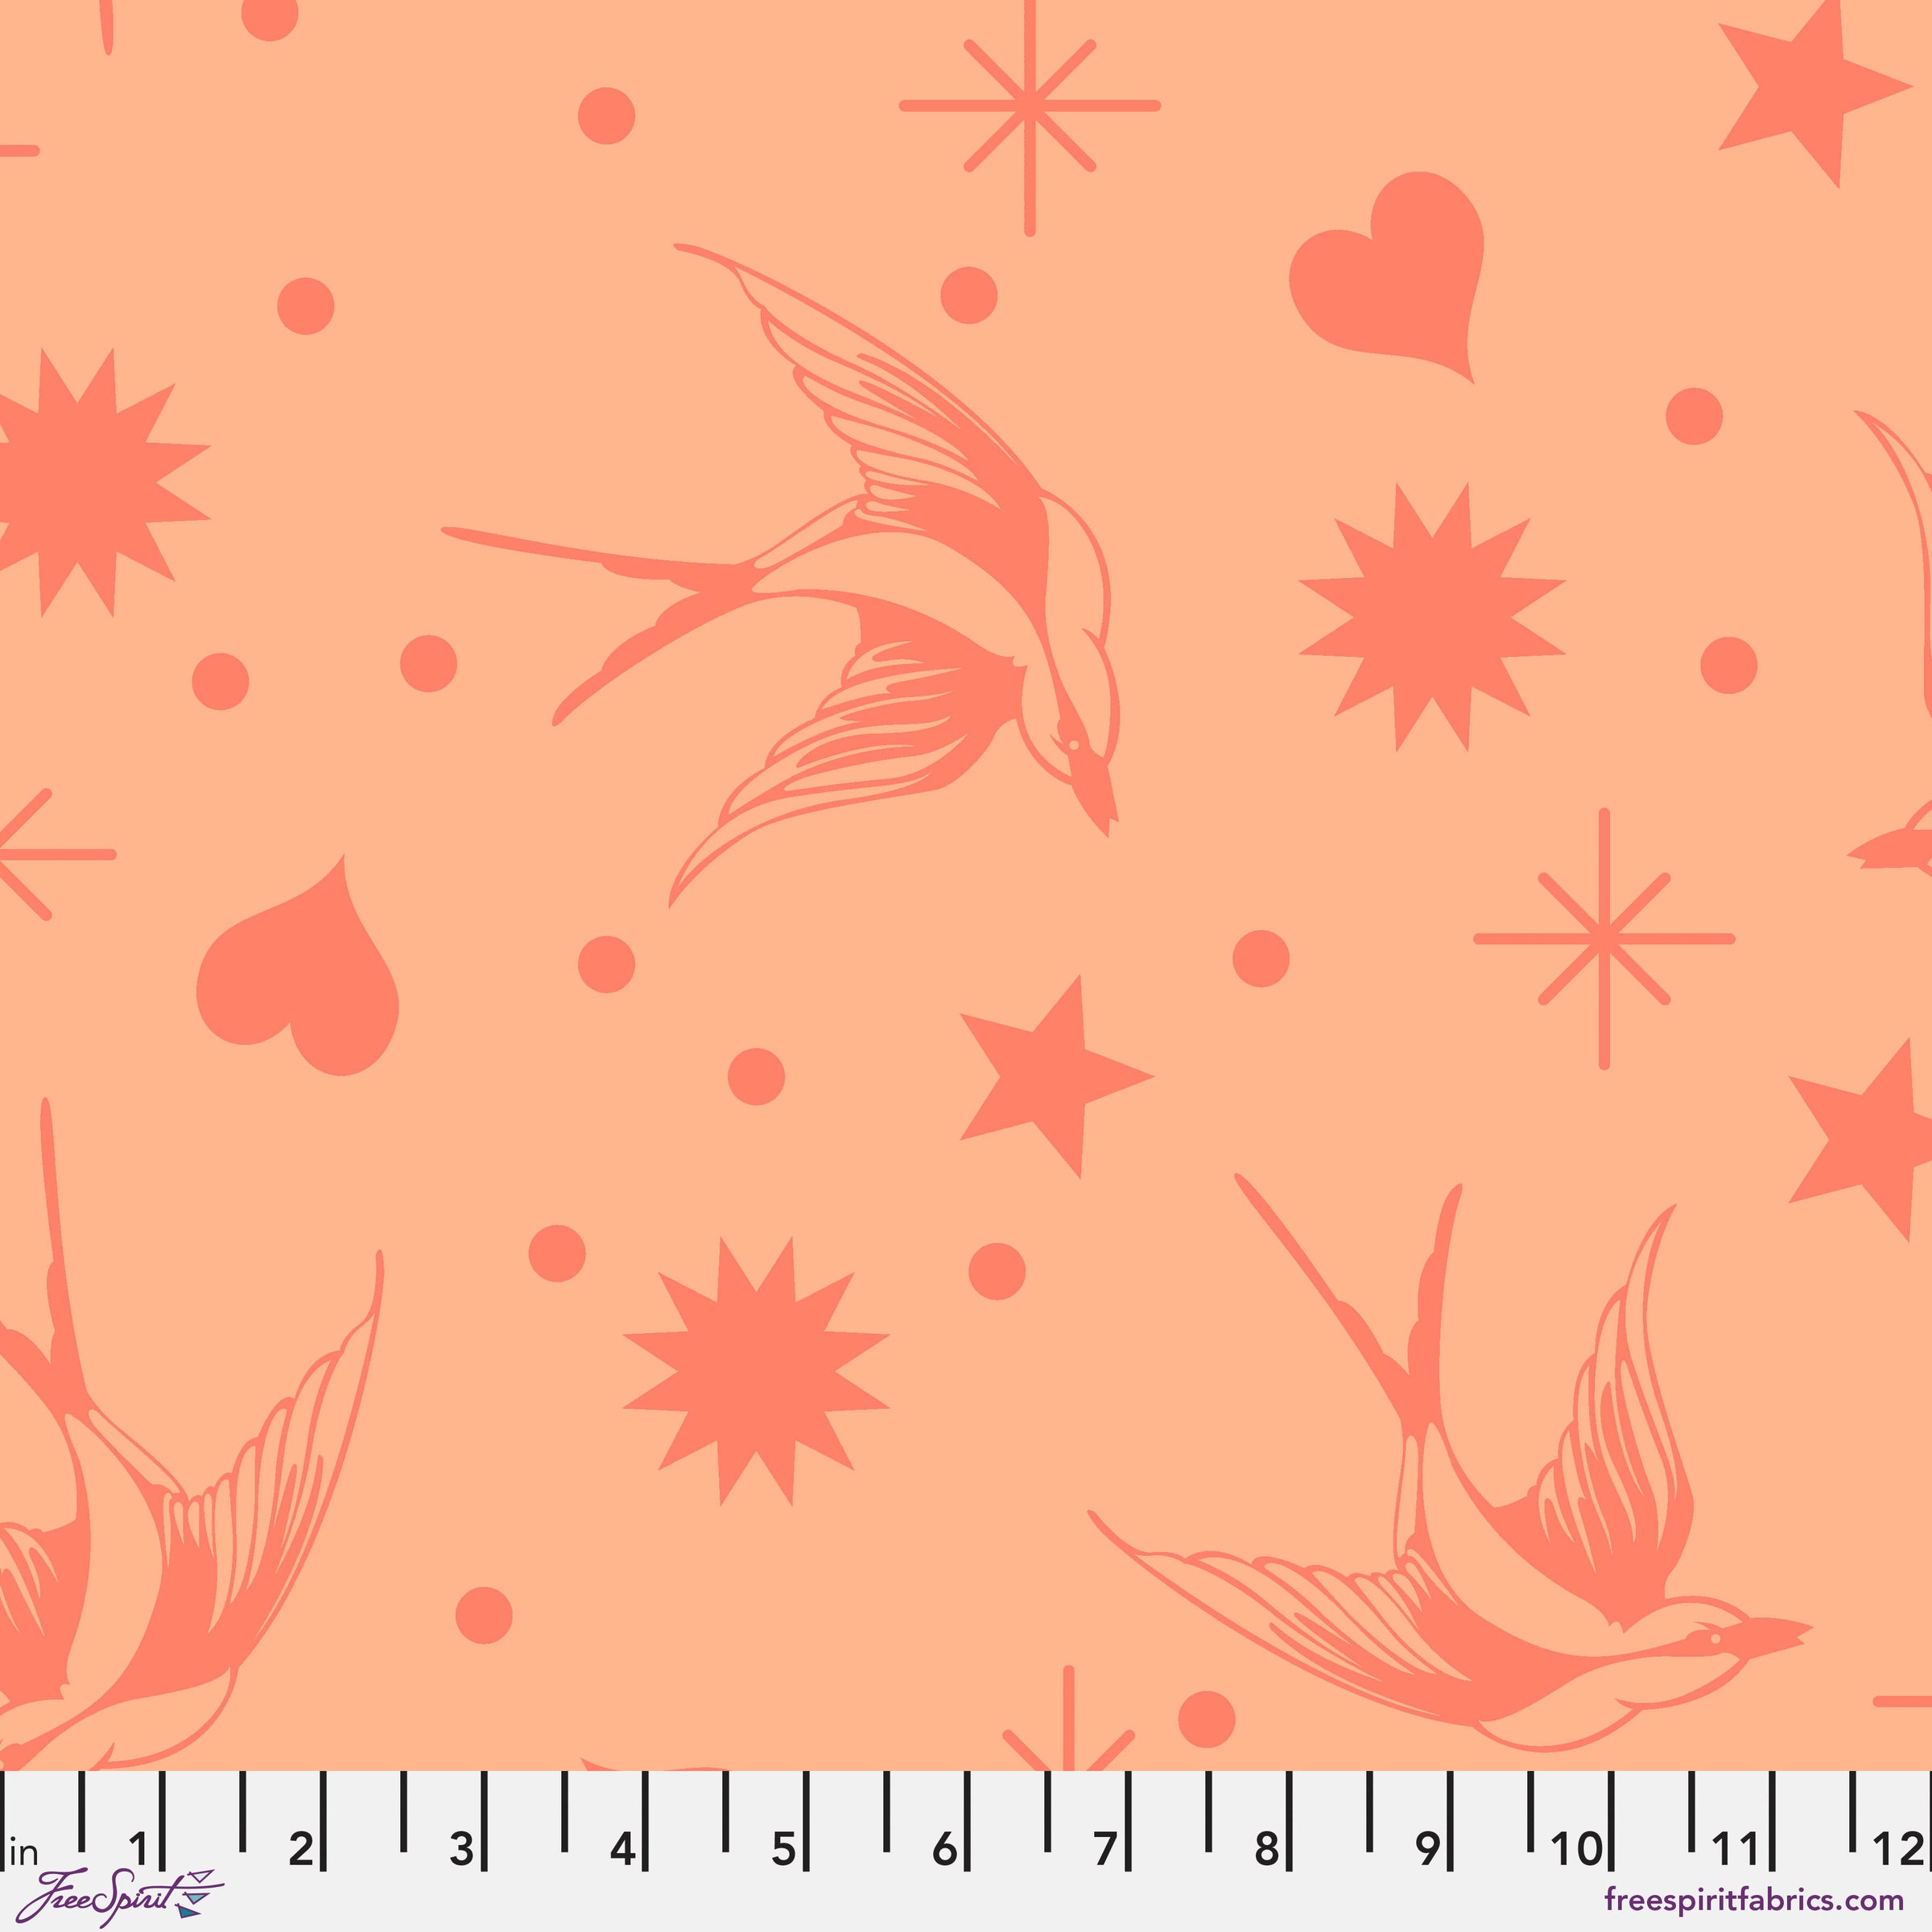 Everglow Quilt Fabric by Tula Pink - Neon Fairy Flakes in Lunar Orange - PWTP157.LUNAR